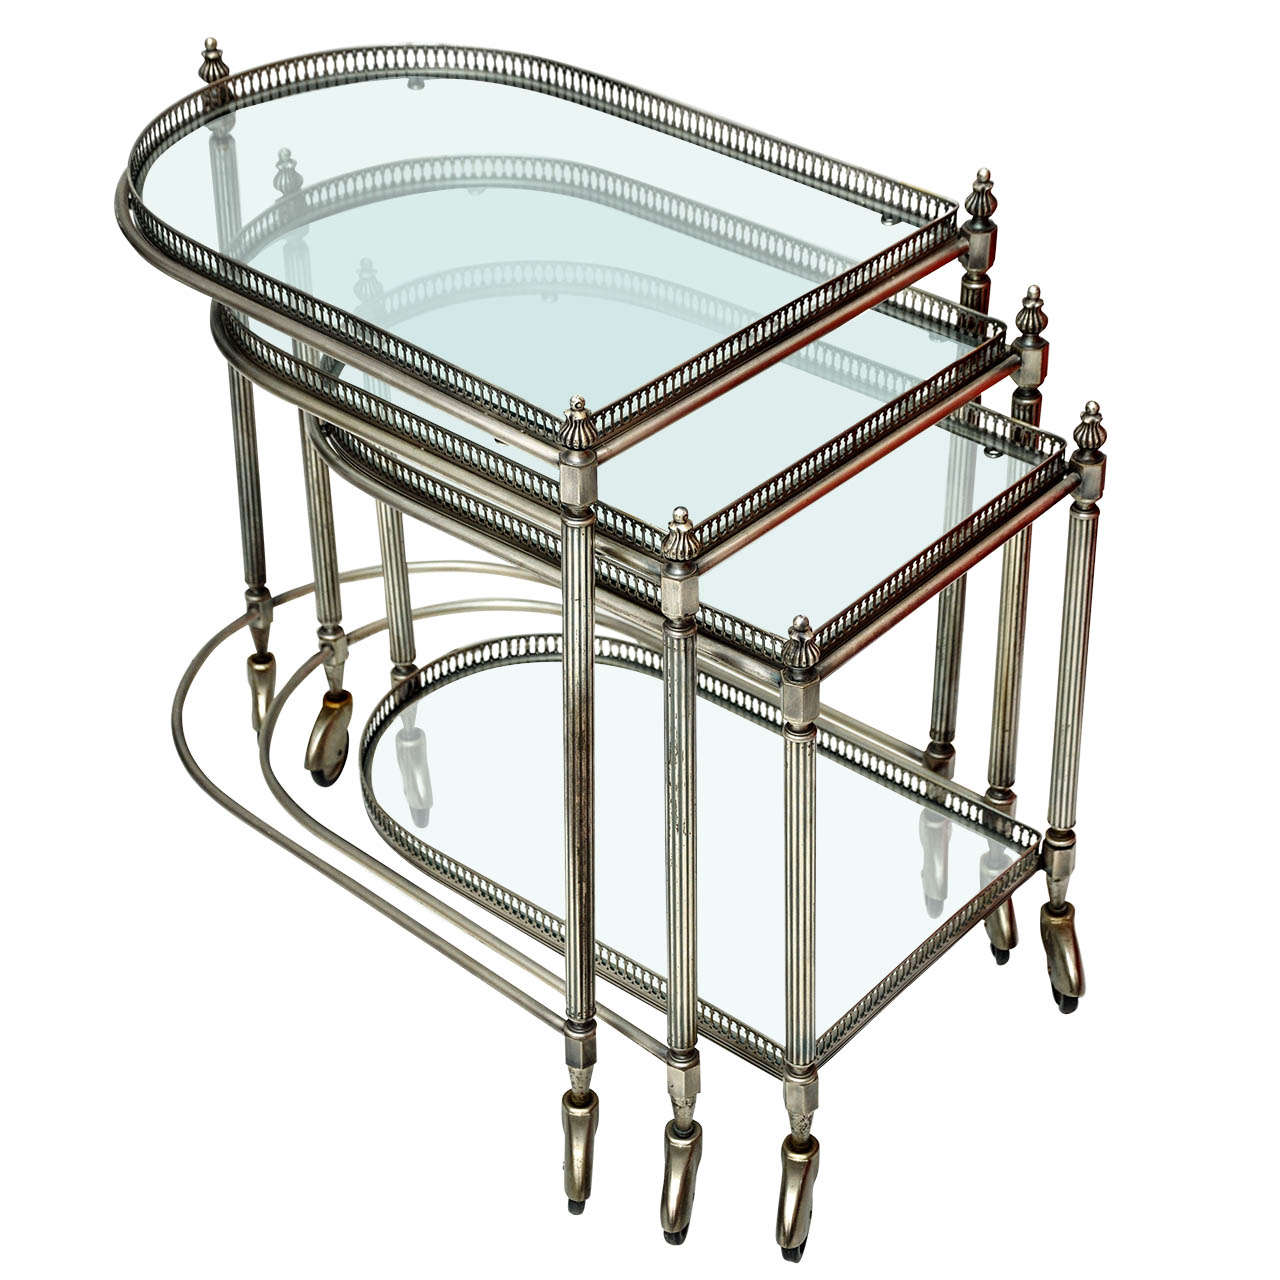 Set of Three Antique Silver-plated Serving Carts